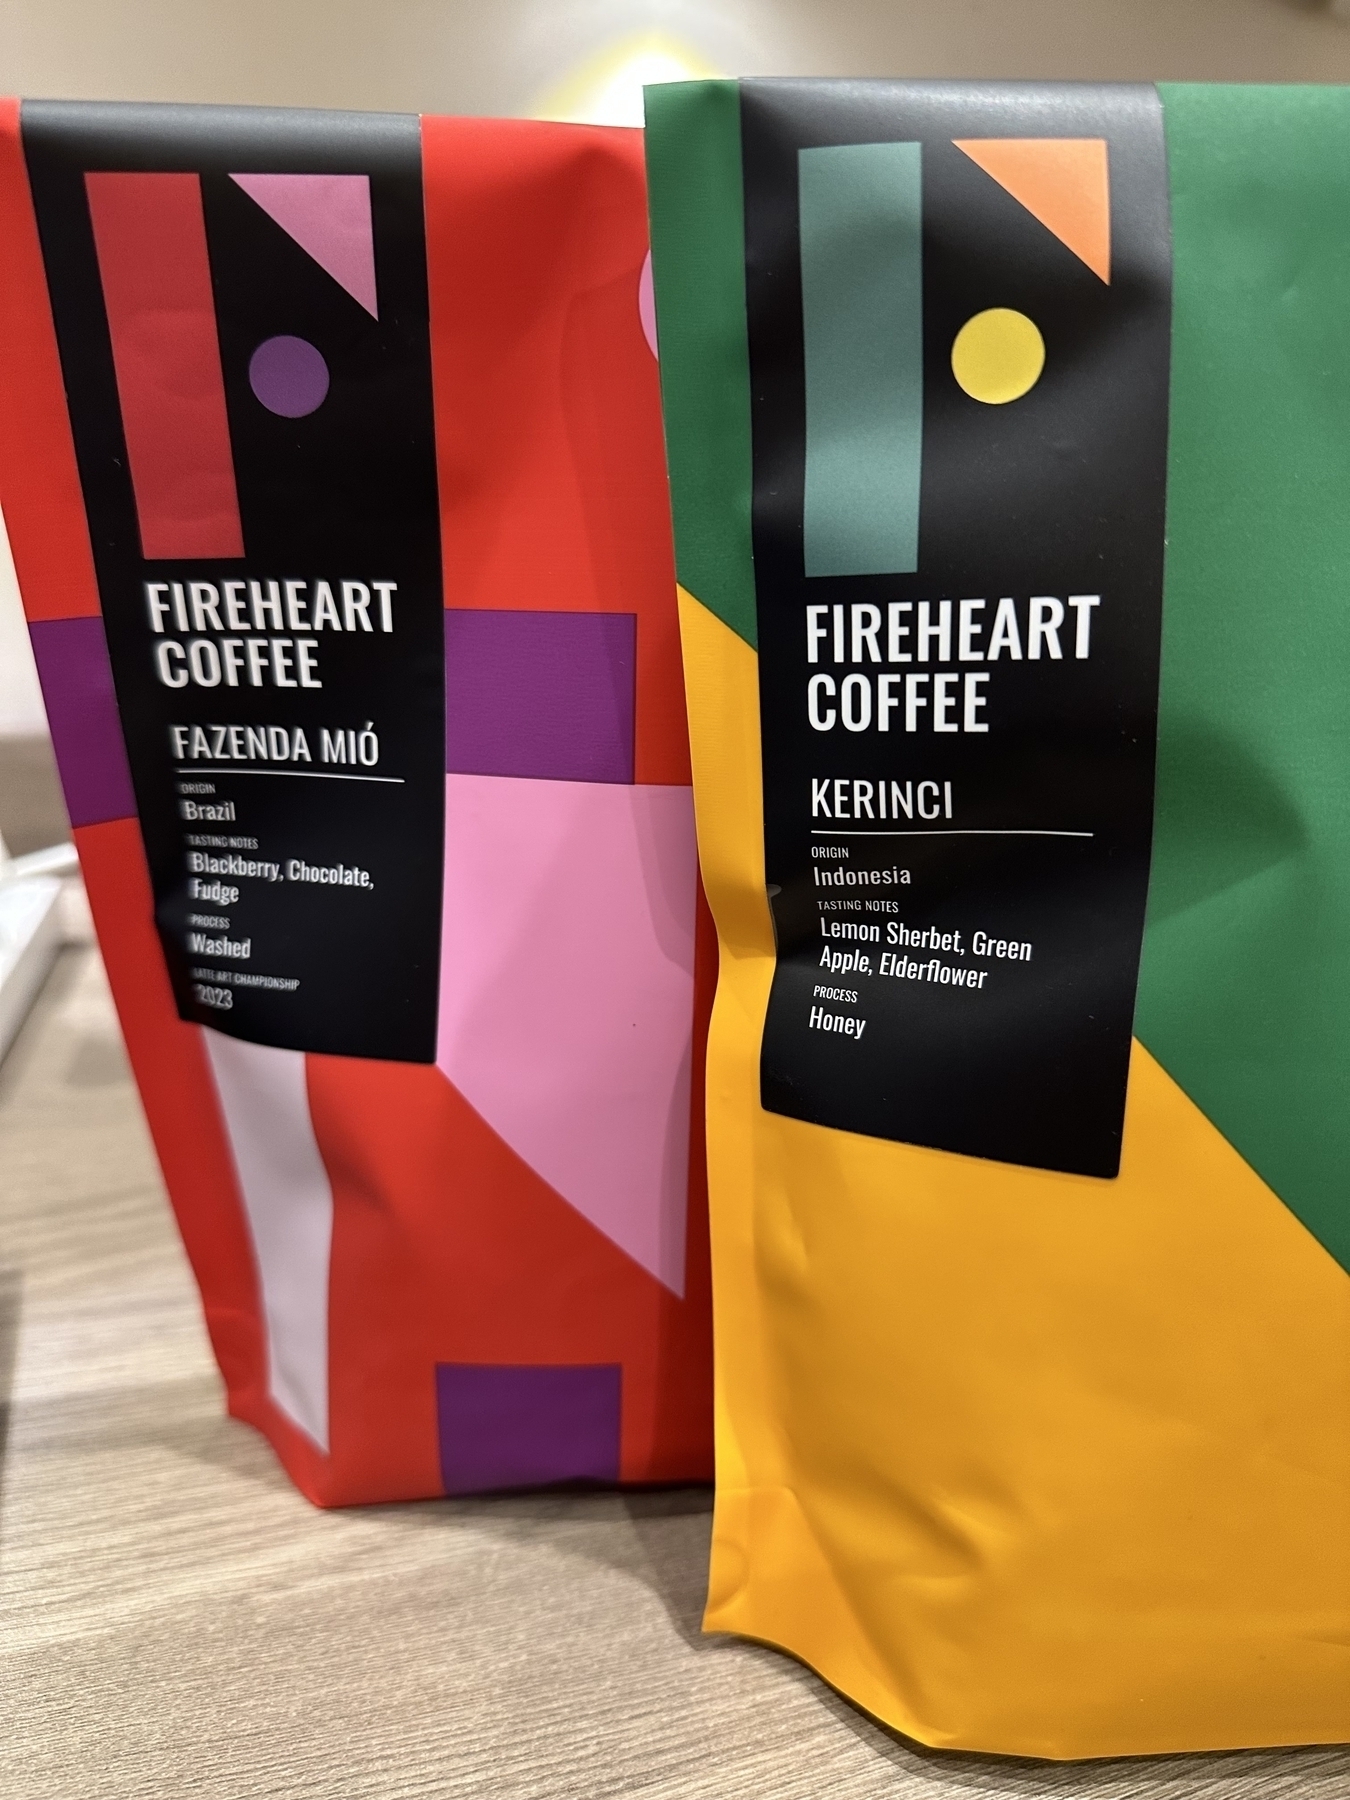 Two bags of coffee from Fireheart Coffee, one red bag of Brazil and one green bag from Indonesia.